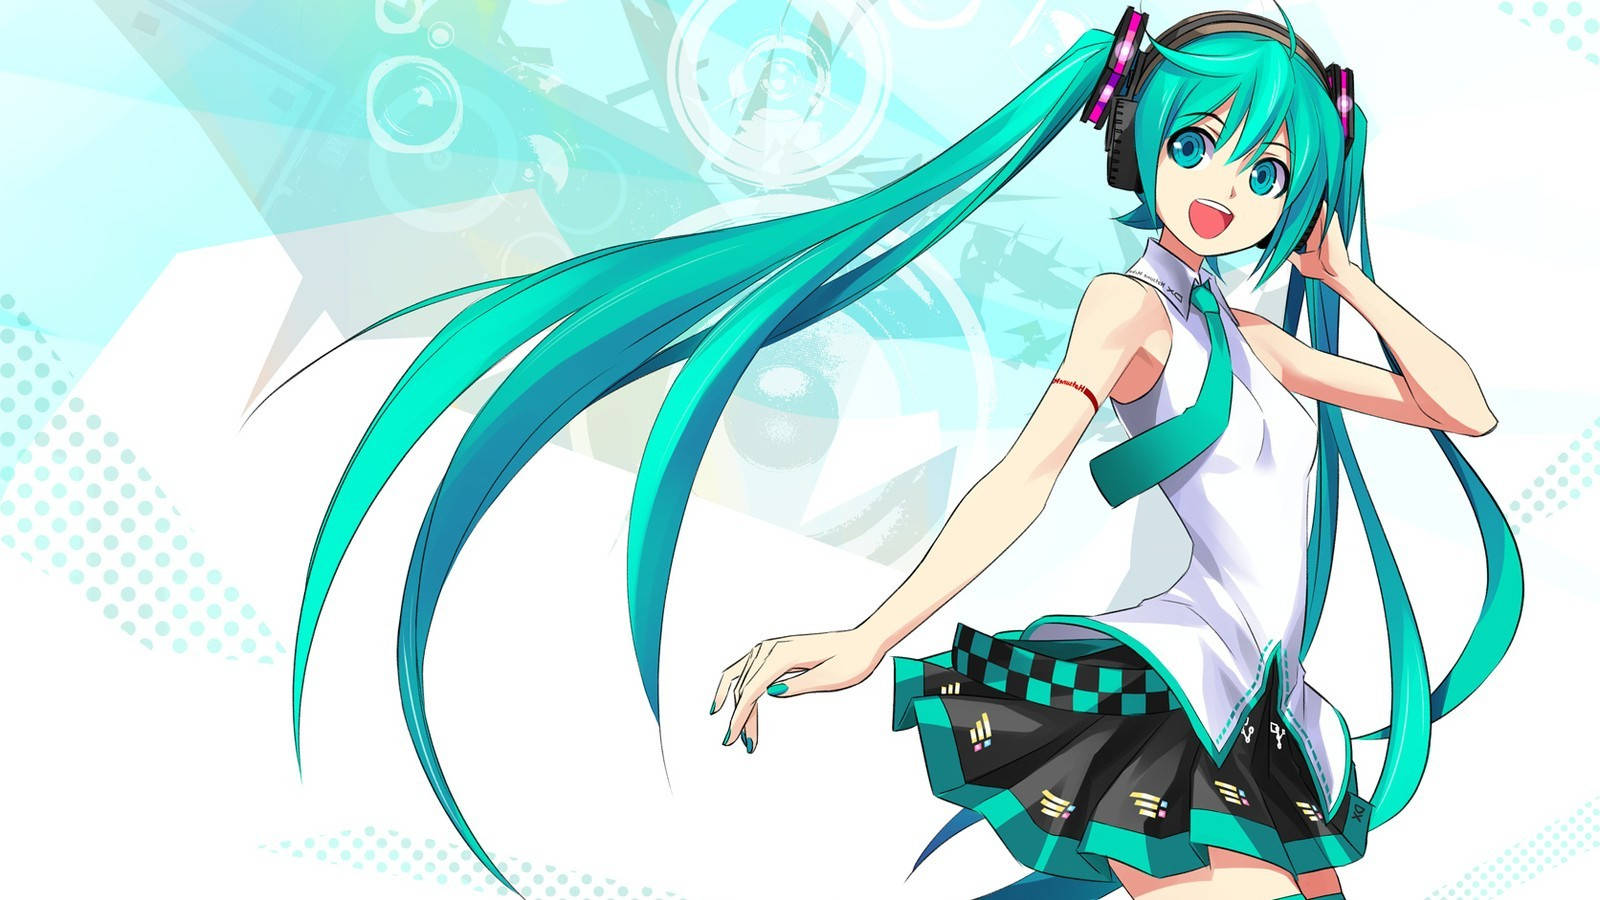 Vocaloid Takes Center Stage Background